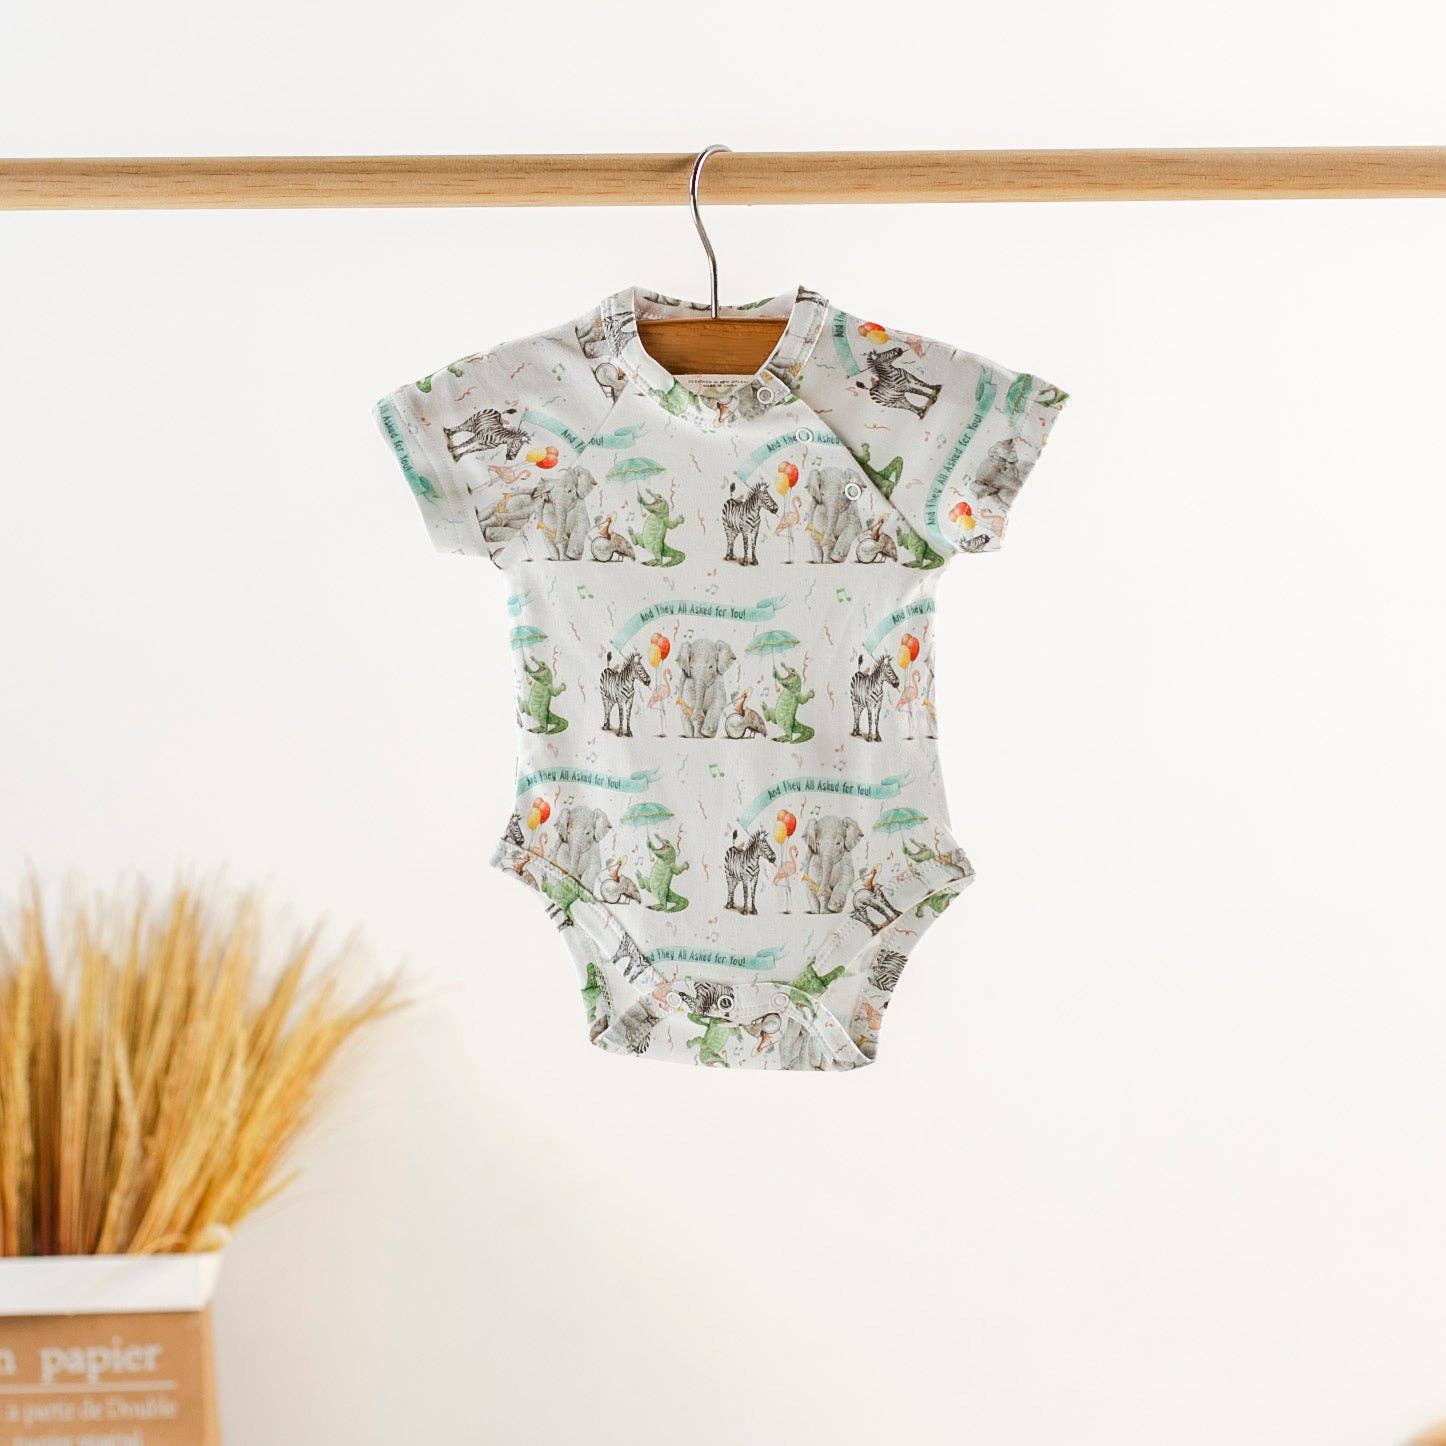 And They All Ask for You Organic Cotton Onesie: 3/6 months